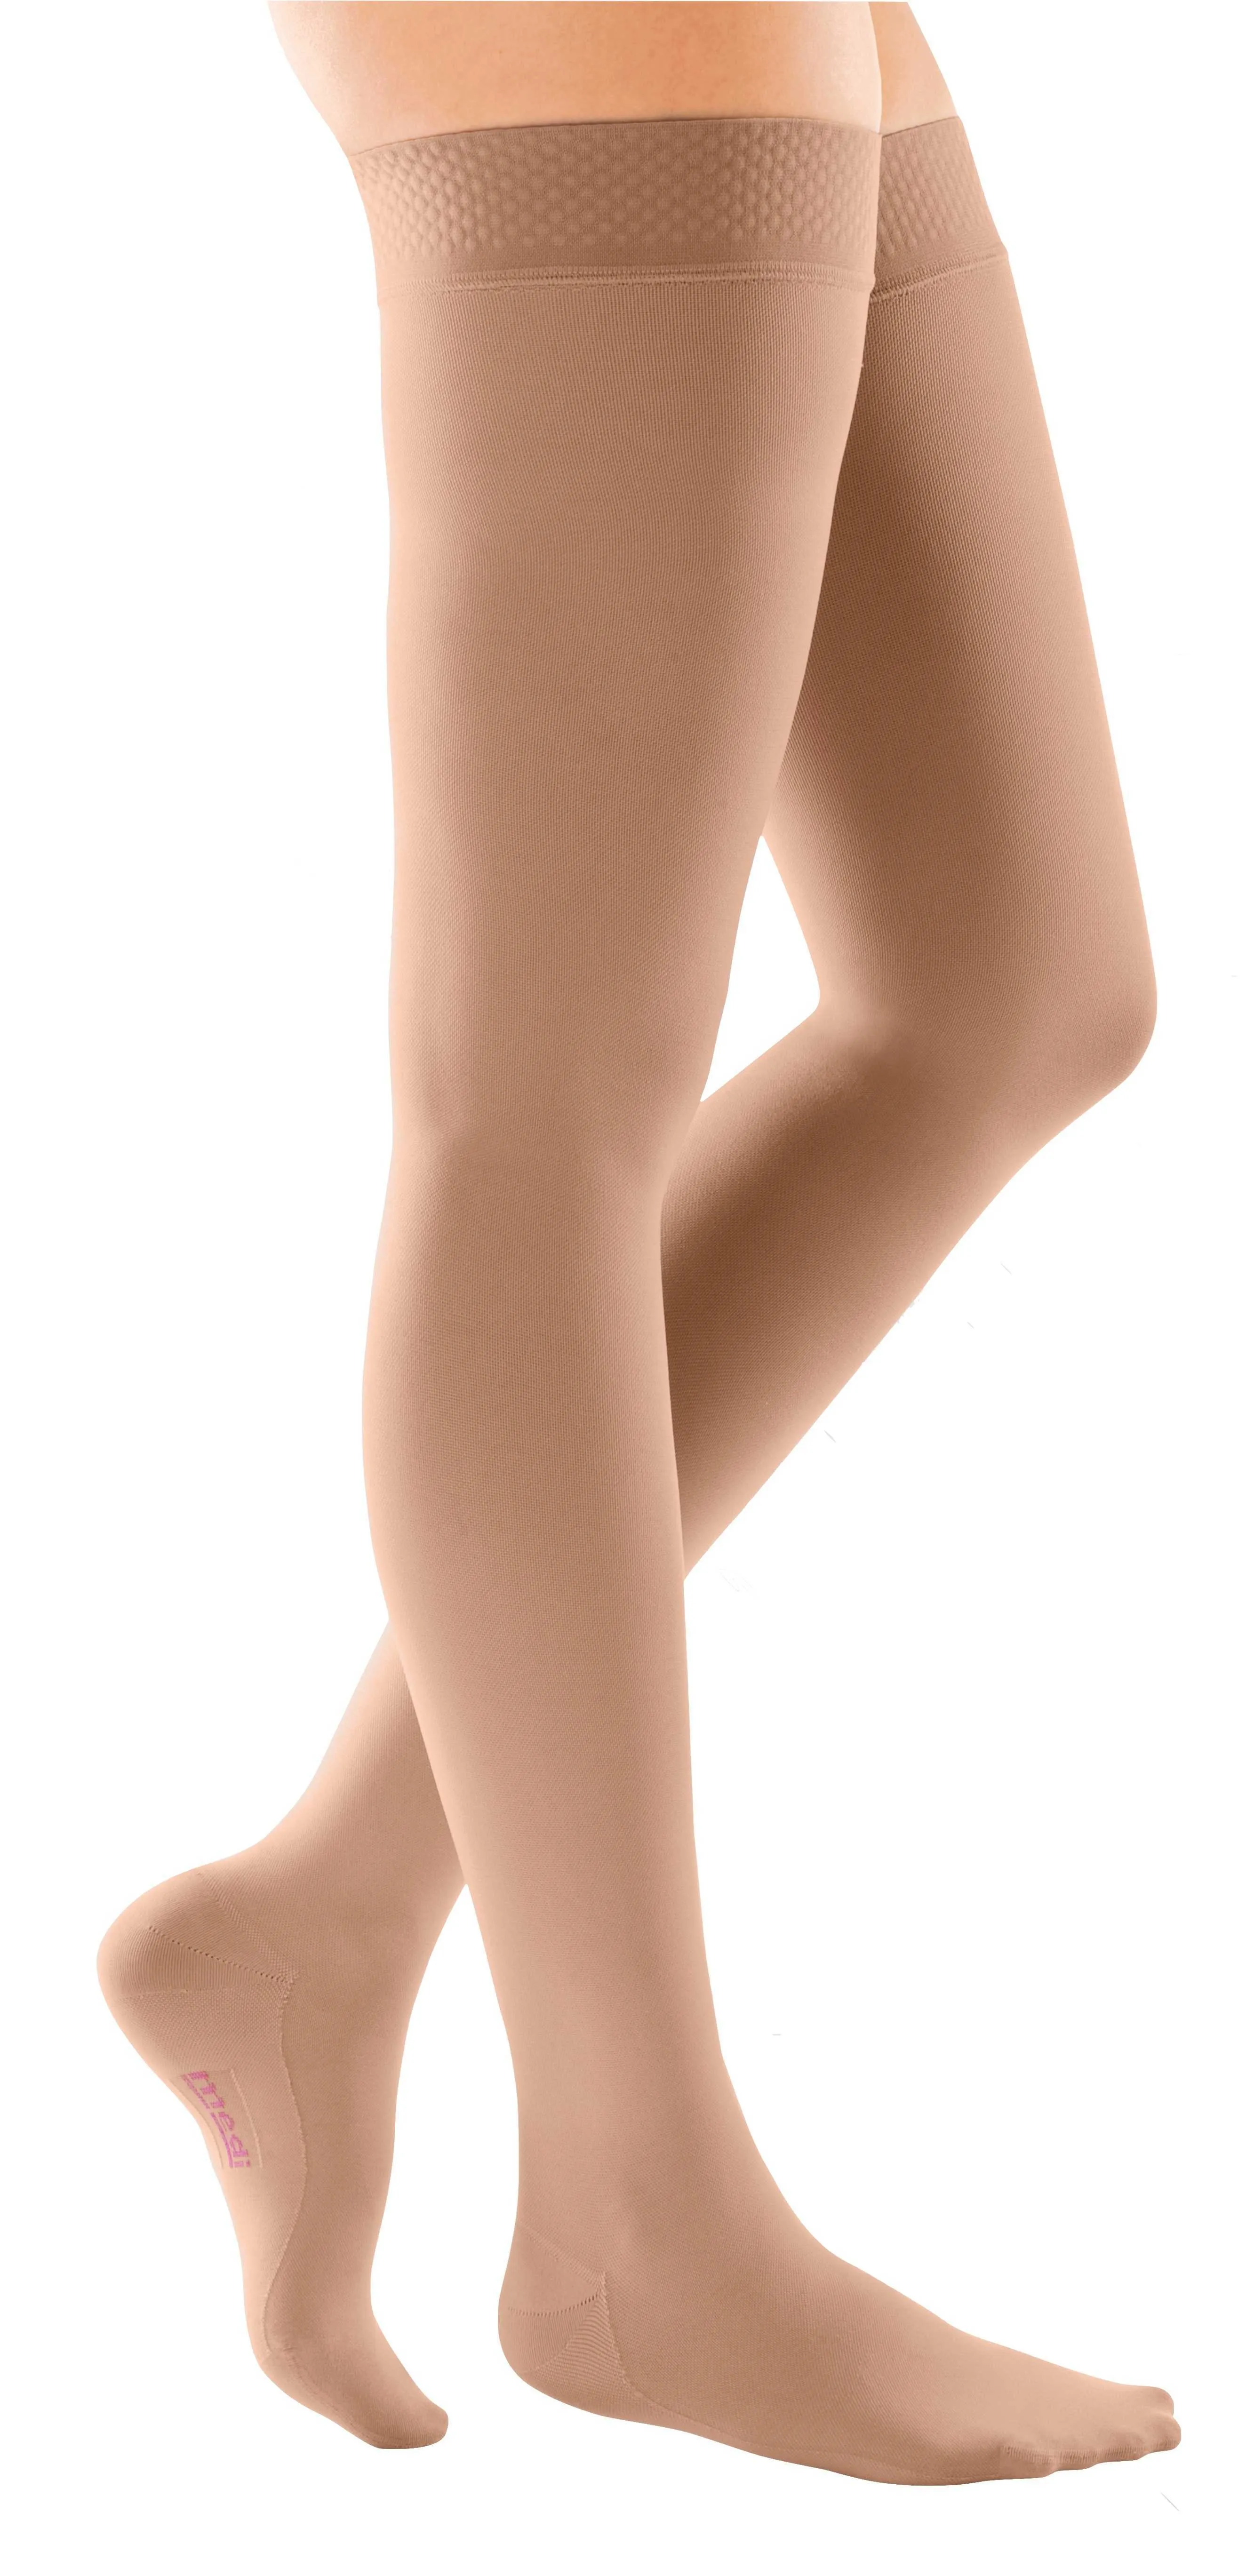 Medi Lp - Mediven Comfort - 19202 - Mediven Comfort Thigh-High with Beaded Silicone Band, 30-40 mmHg, Petite, Closed Toe, Natural, Size 2.